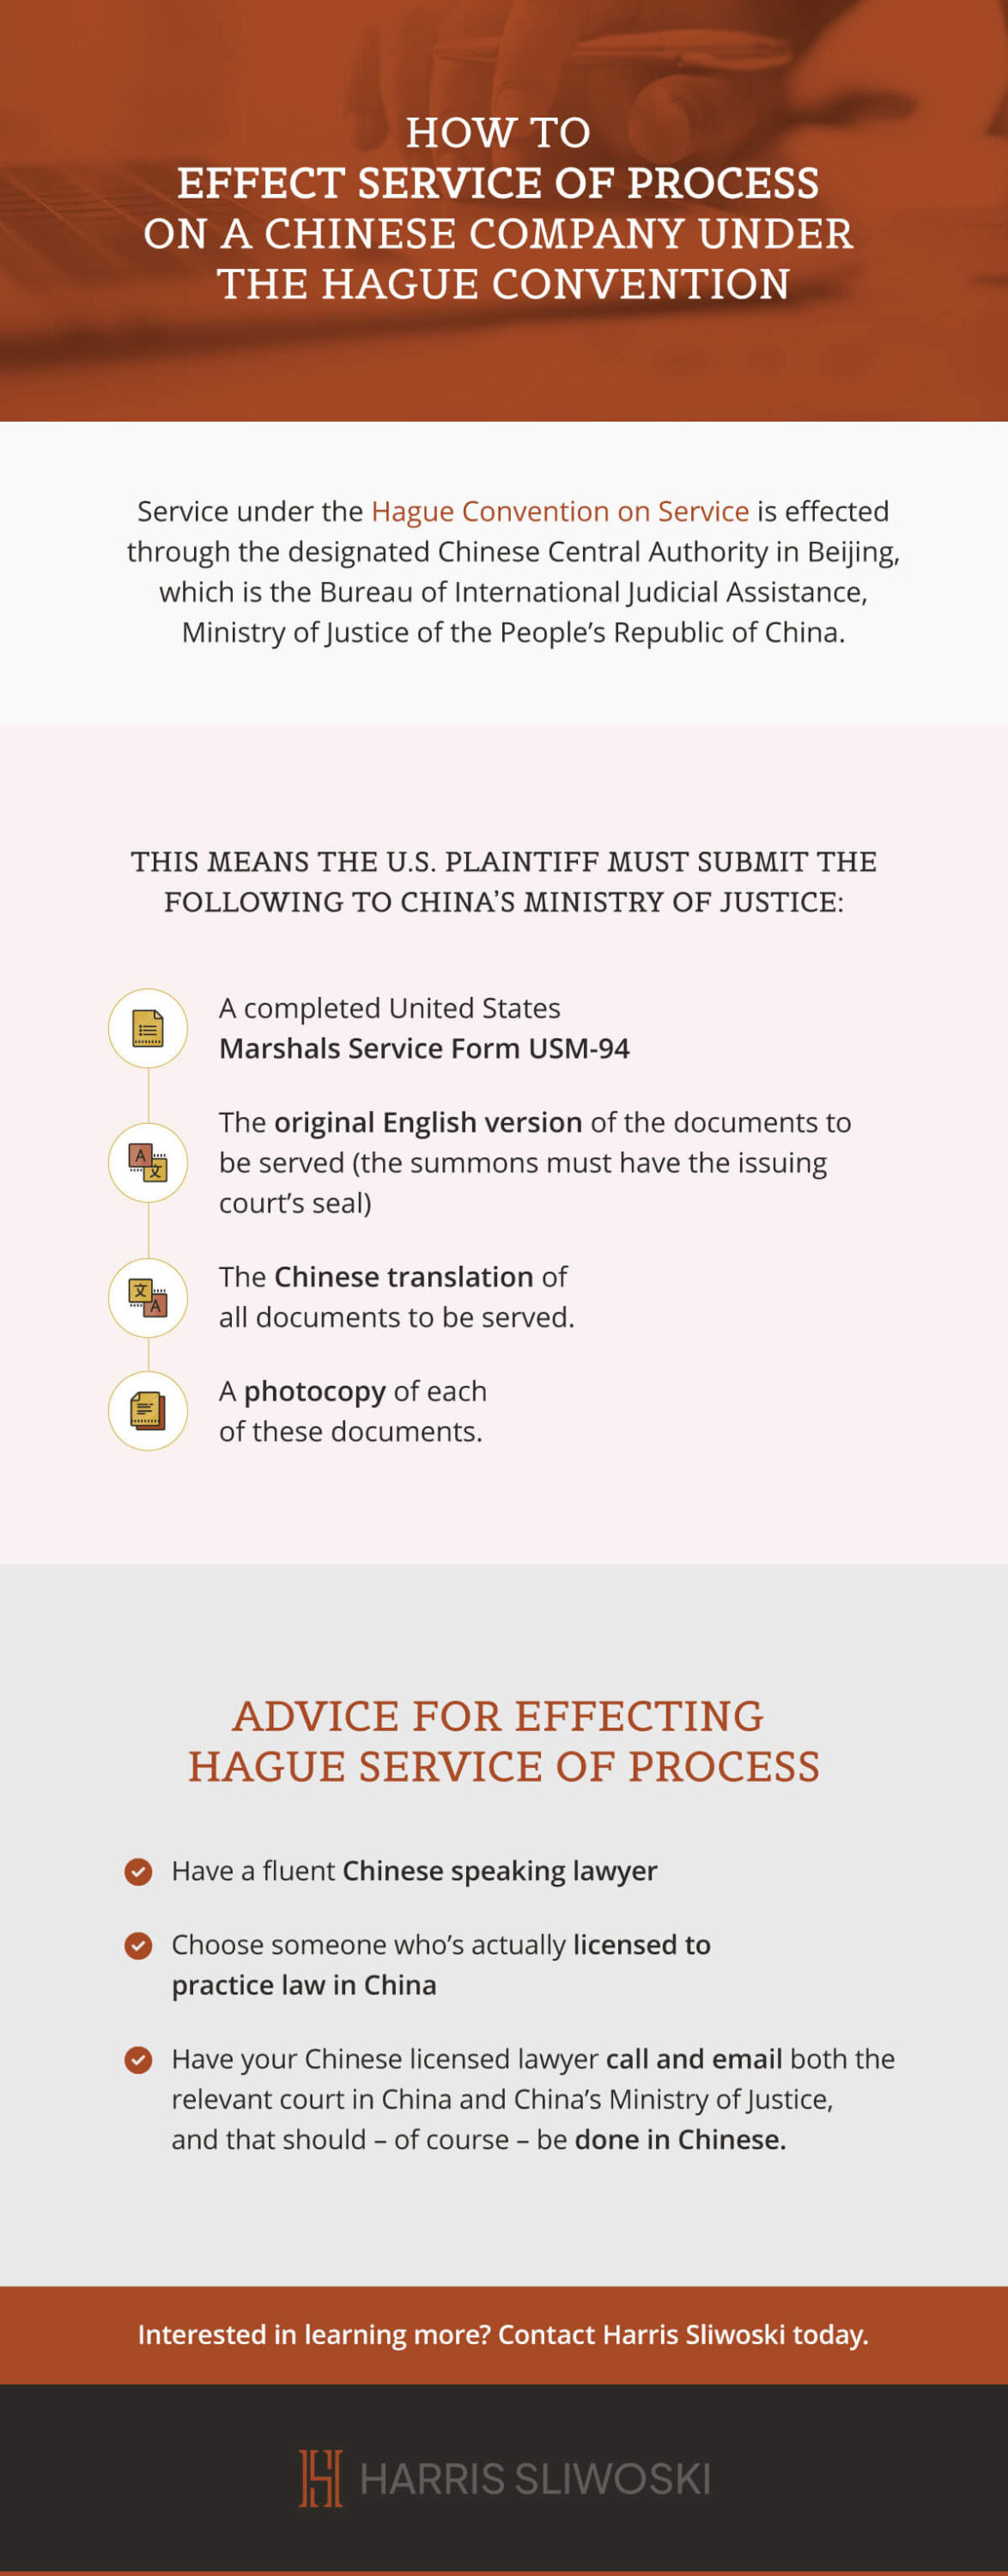 How to effect service of process on a Chinese company under the Hague convention. Service under the Hague convention on service is effected through the designated Chinese Central Authority in Beijing, which is the Bureau of International Judicial Assistance, Ministry of Justice of the People's Republic of China. This means the U.S. plaintiff must submit the following to China's ministry of justice: A completed United States Marshals Service Form USM-94. The original English version of the documents to be served (the summons must have the issuing court's seal). The Chinese translation of all documents to be served. A photocopy of each of these documents. Advice for effecting Hague service of process. Have a fluent Chinese speaking lawyer. Choose someone who's actually licensed to practice law in China. Have your Chinese licensed lawyer call and email both the relevant court in China and China's ministry of justice, and that should - of course - be done in Chinese. Interested in learning more? Contact Harris Sliwoski today.